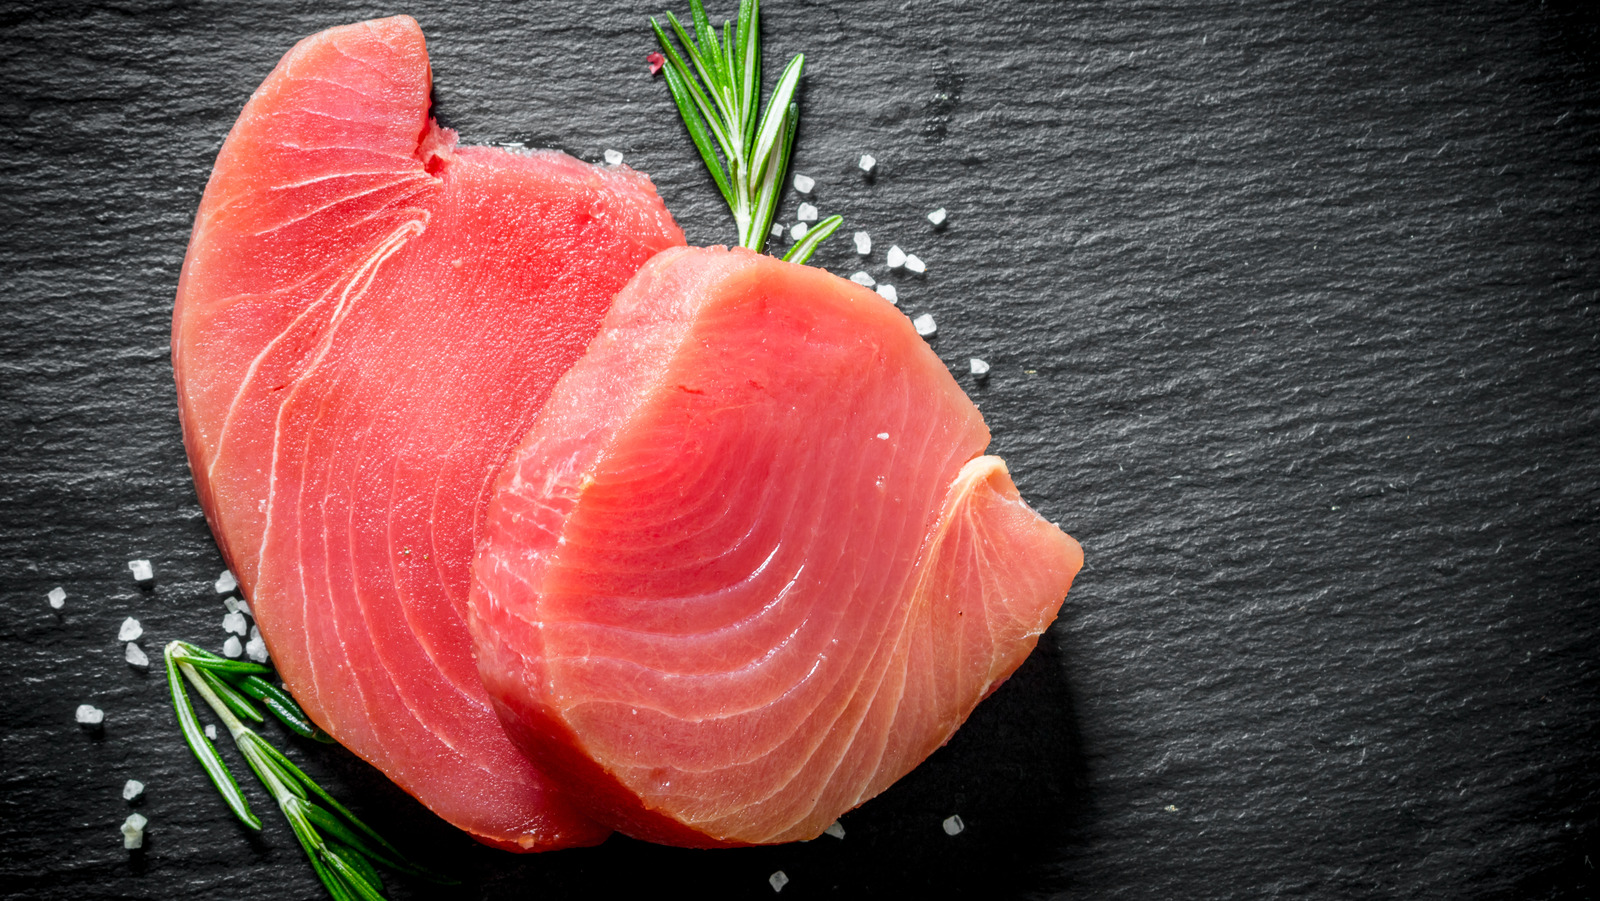 What You Should Know Before Eating Raw Tuna